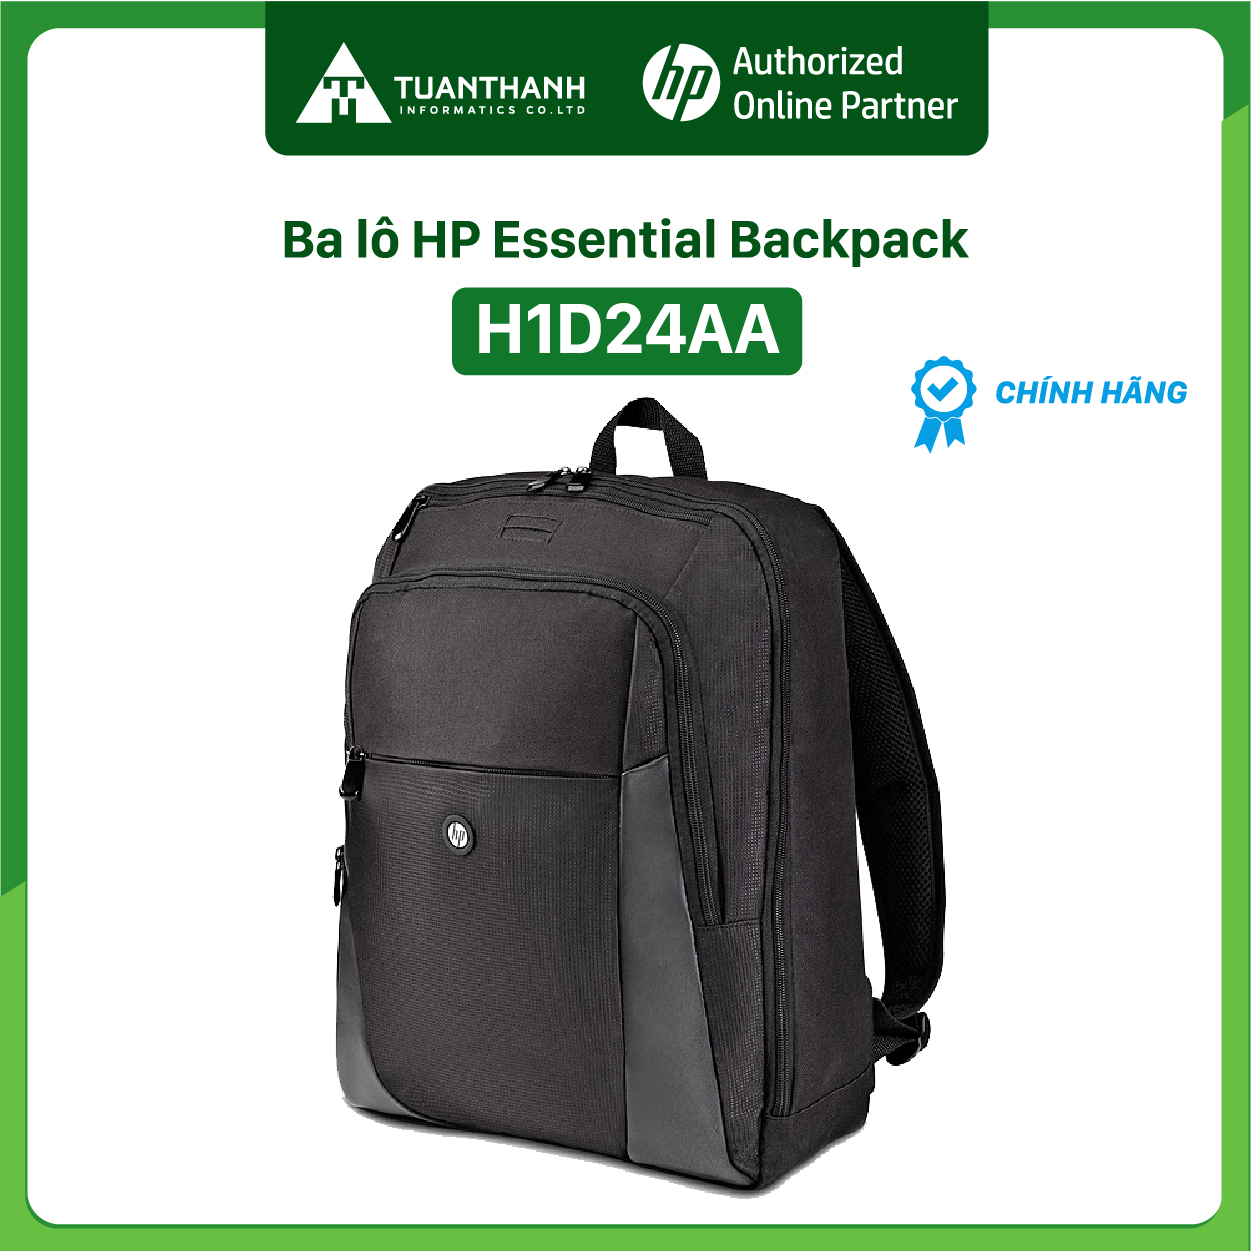 Balo Laptop Essential Backpack H1D24AA